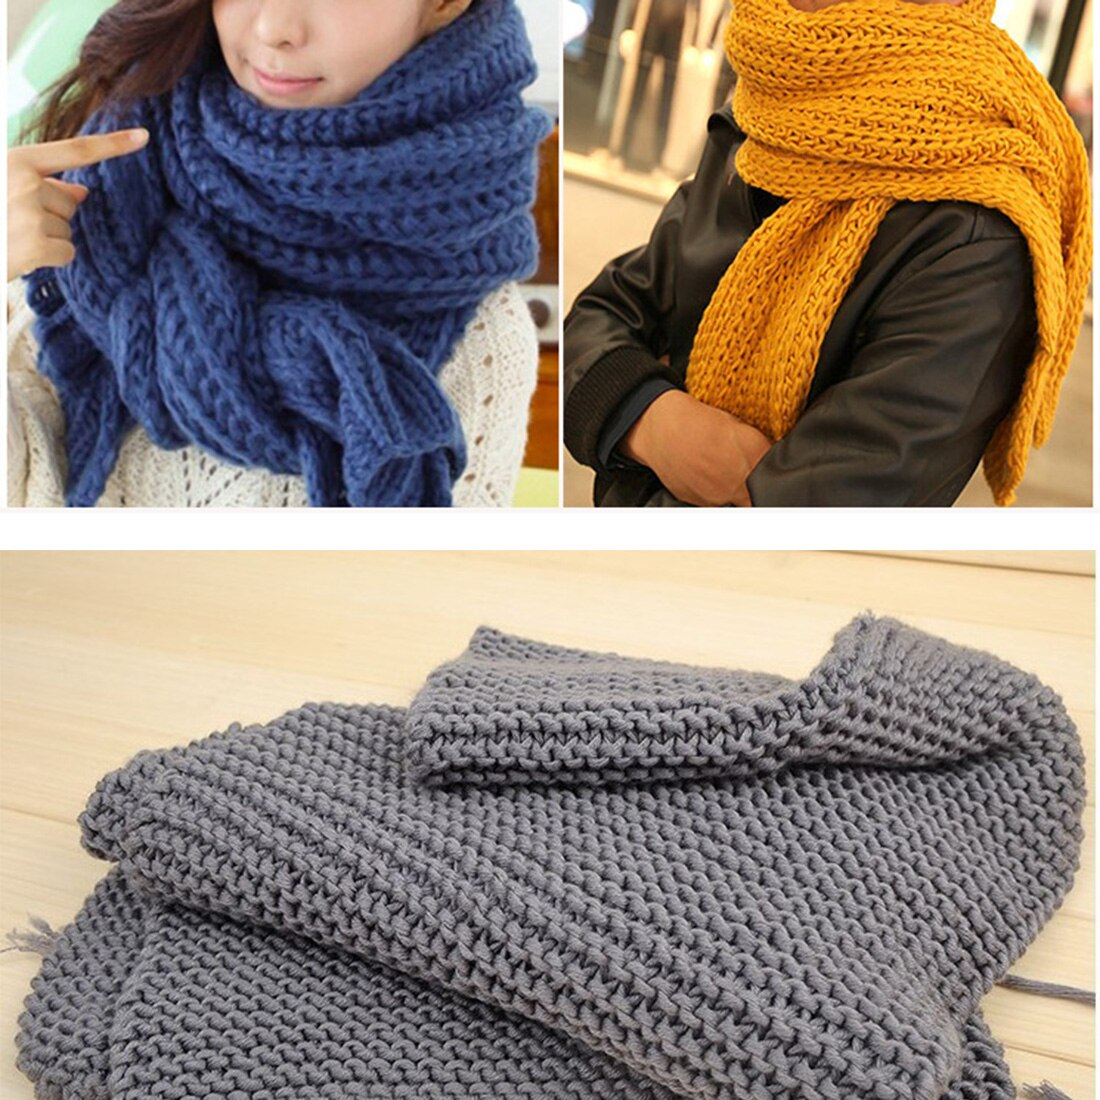 Hand Knit Scarf Pattern Us 58 18 Offsoft Cotton Ba Knitting Wool Yarn Milk Cotton Thick Yarn For Knitting Scarf Hand Knitting Crochet Yarn In Yarn From Home Garden On